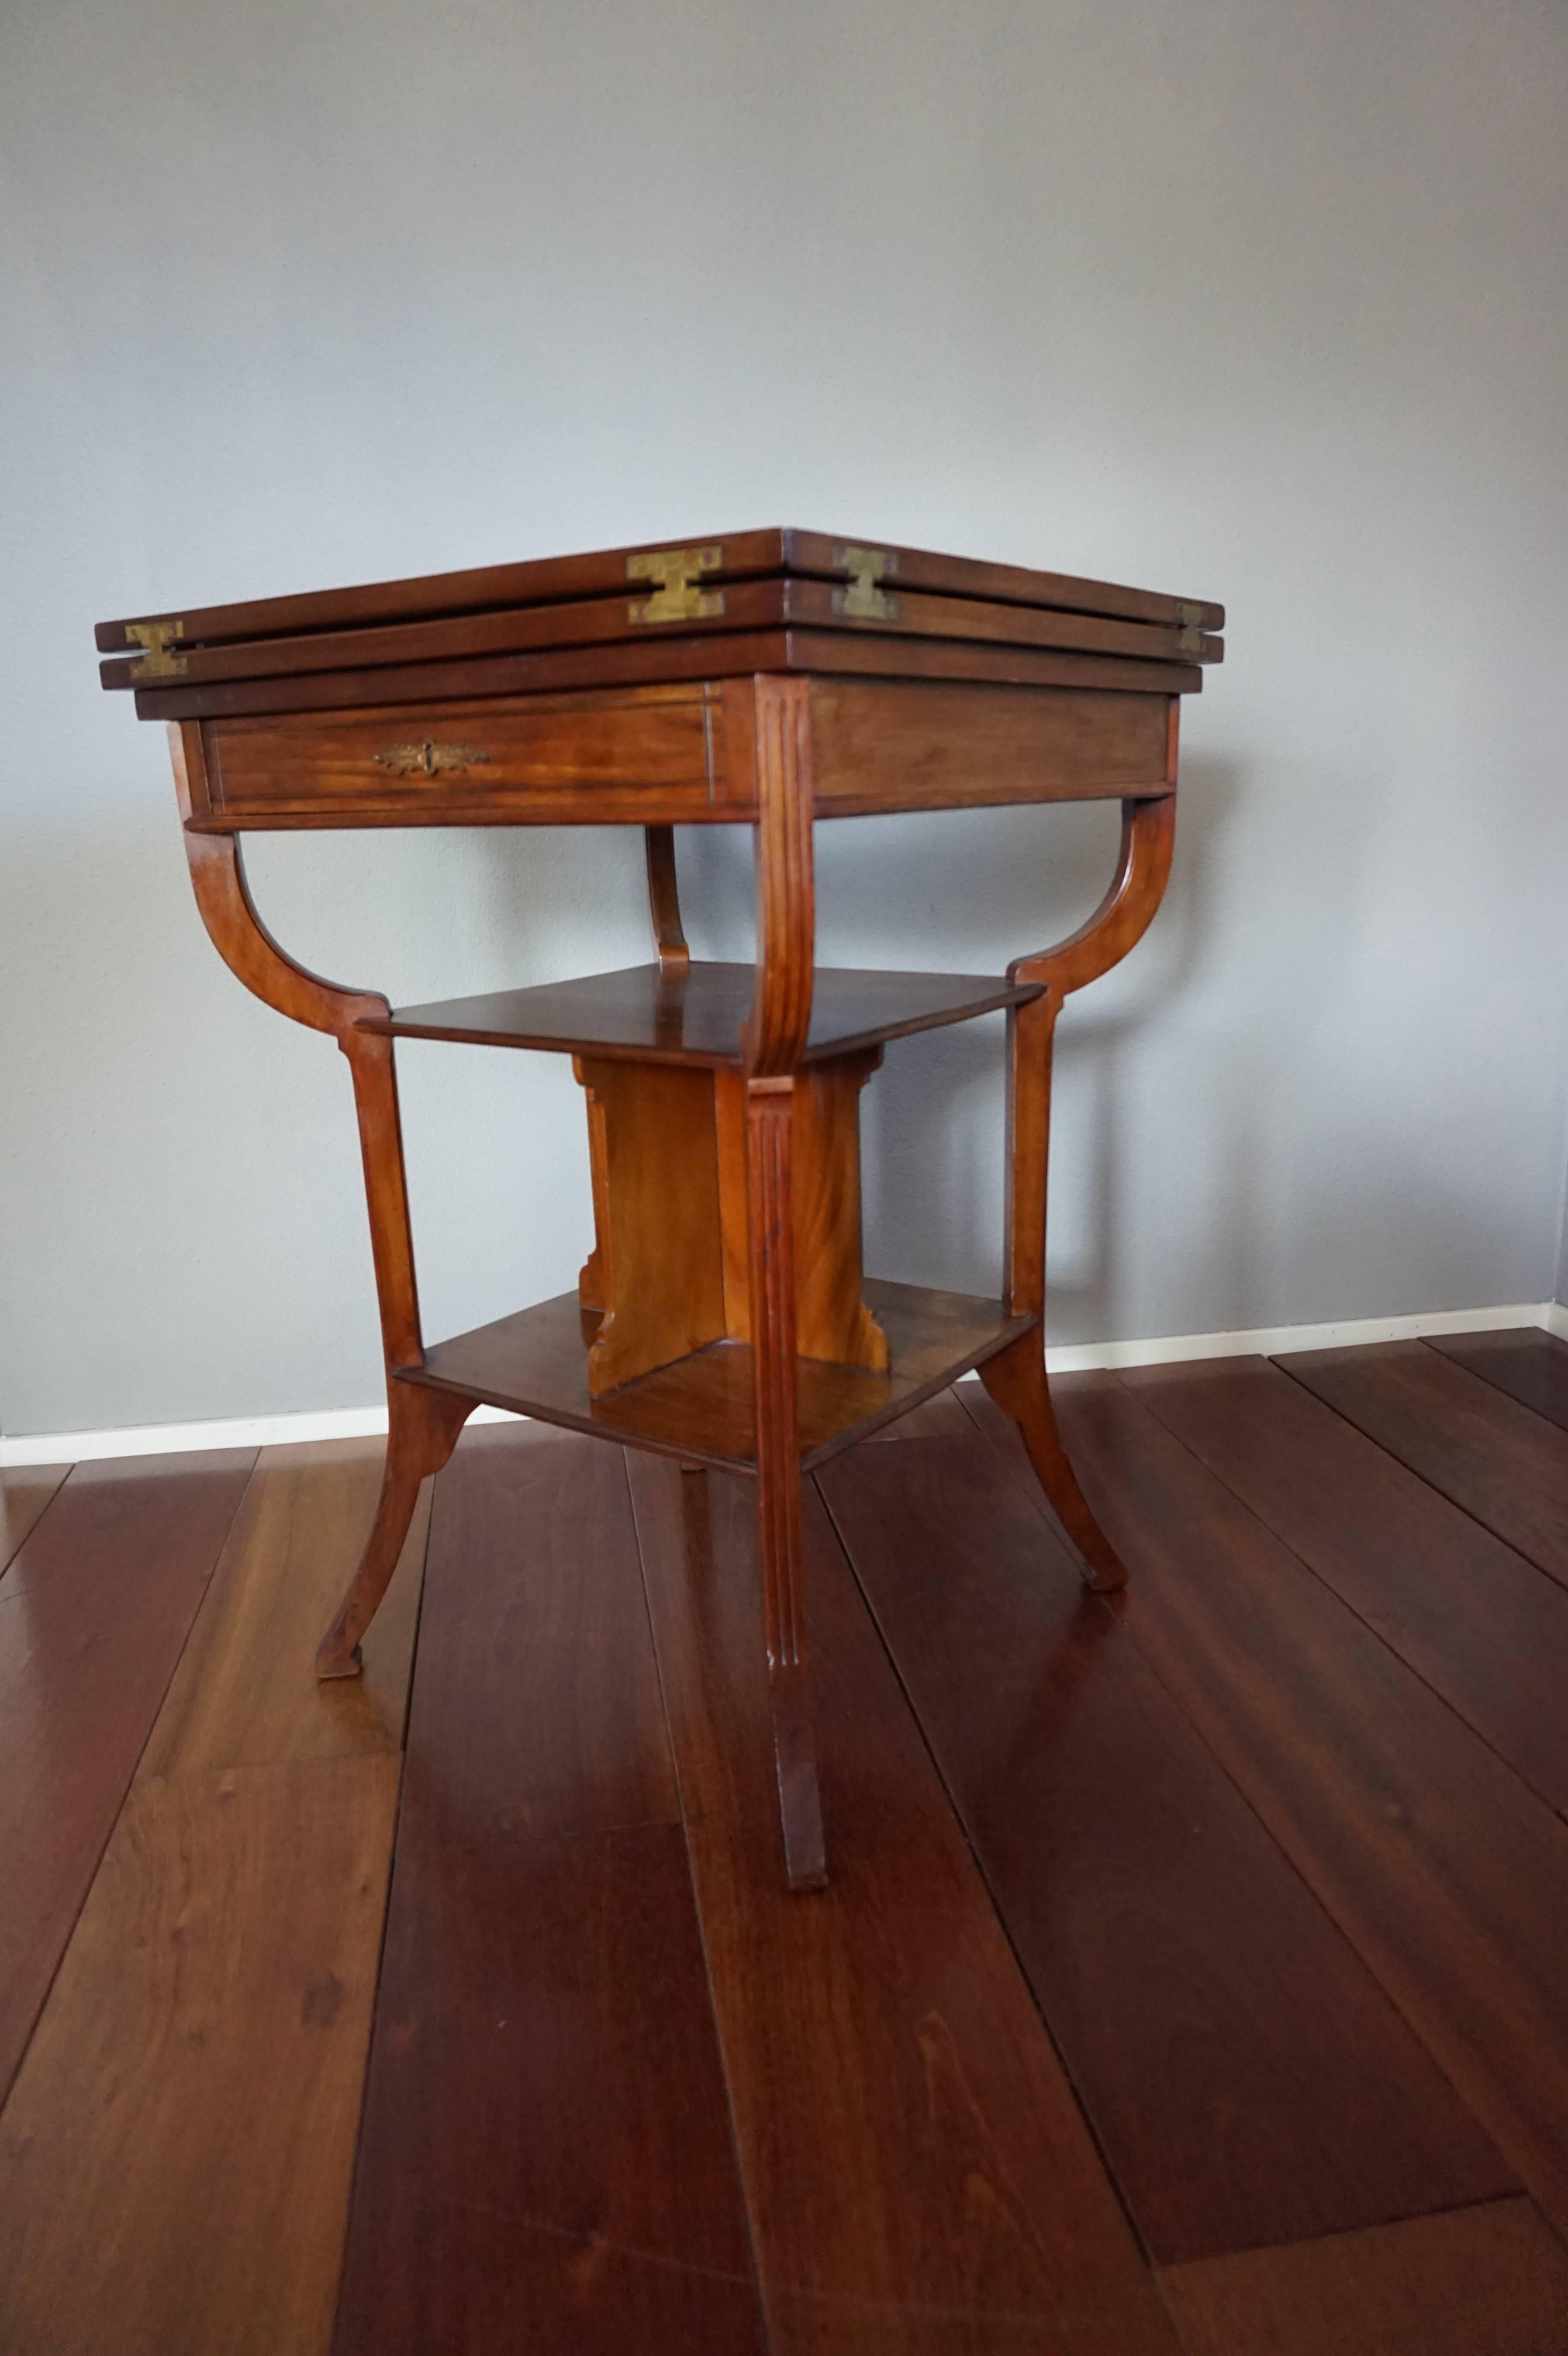 Top quality and condition games table with integrated bookcase and drawer.

This rare and impressive games table by one of Holland's finest furniture designers/makers from the turn of the century is in excellent condition. This beautiful timber